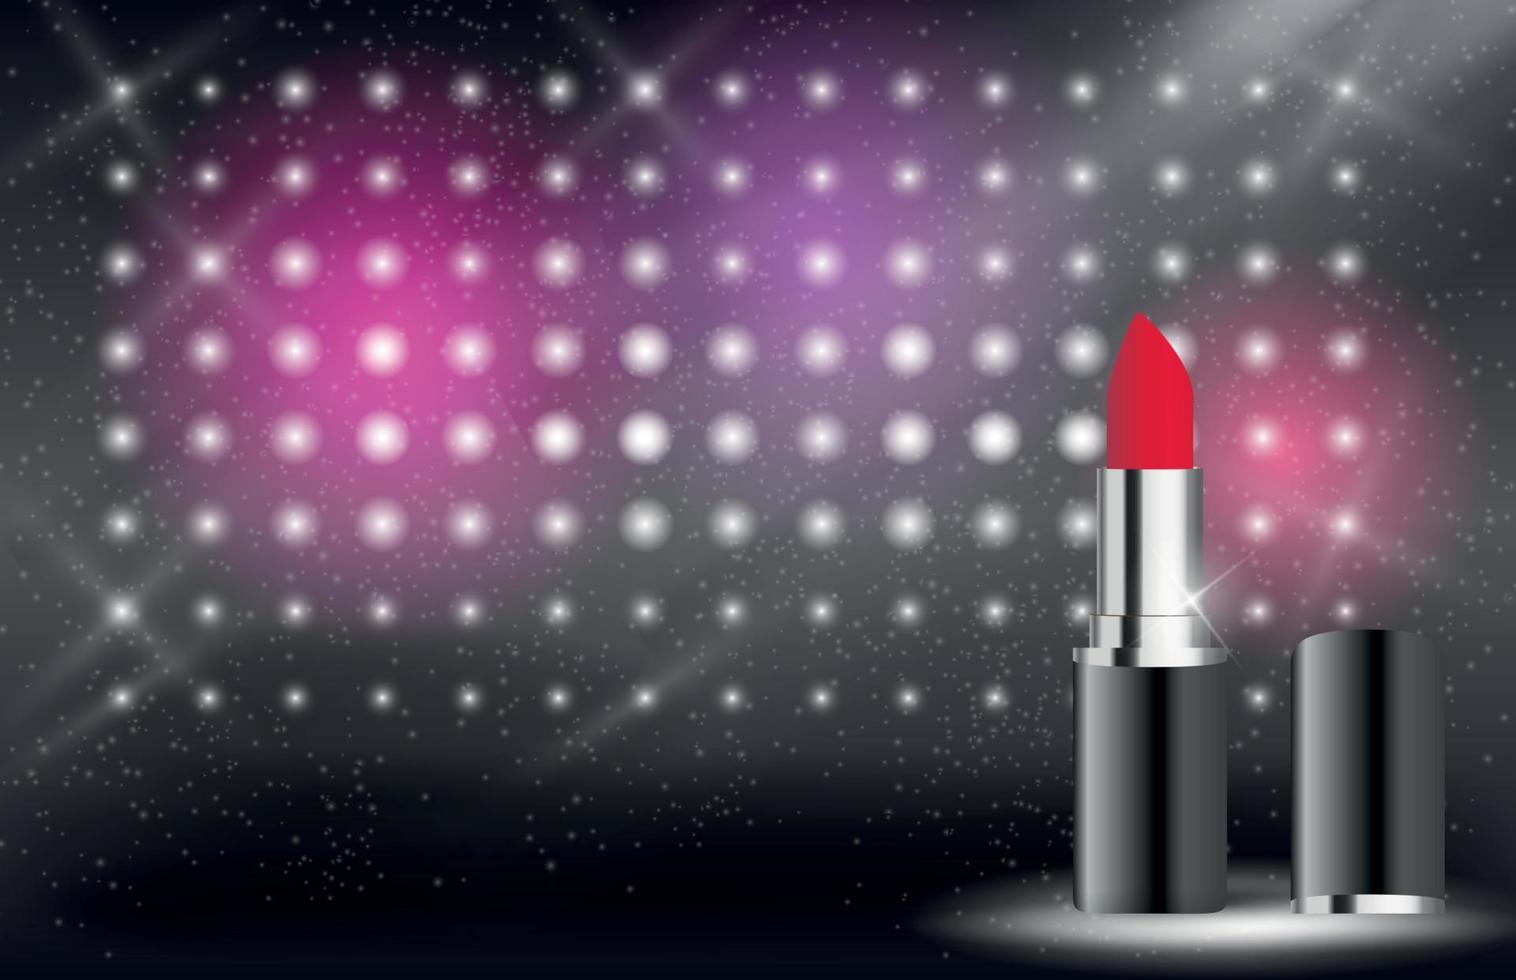 Design Cosmetics Product Lipstick Template for Ads or Magazine Background. 3D Realistic Vector Iillustration